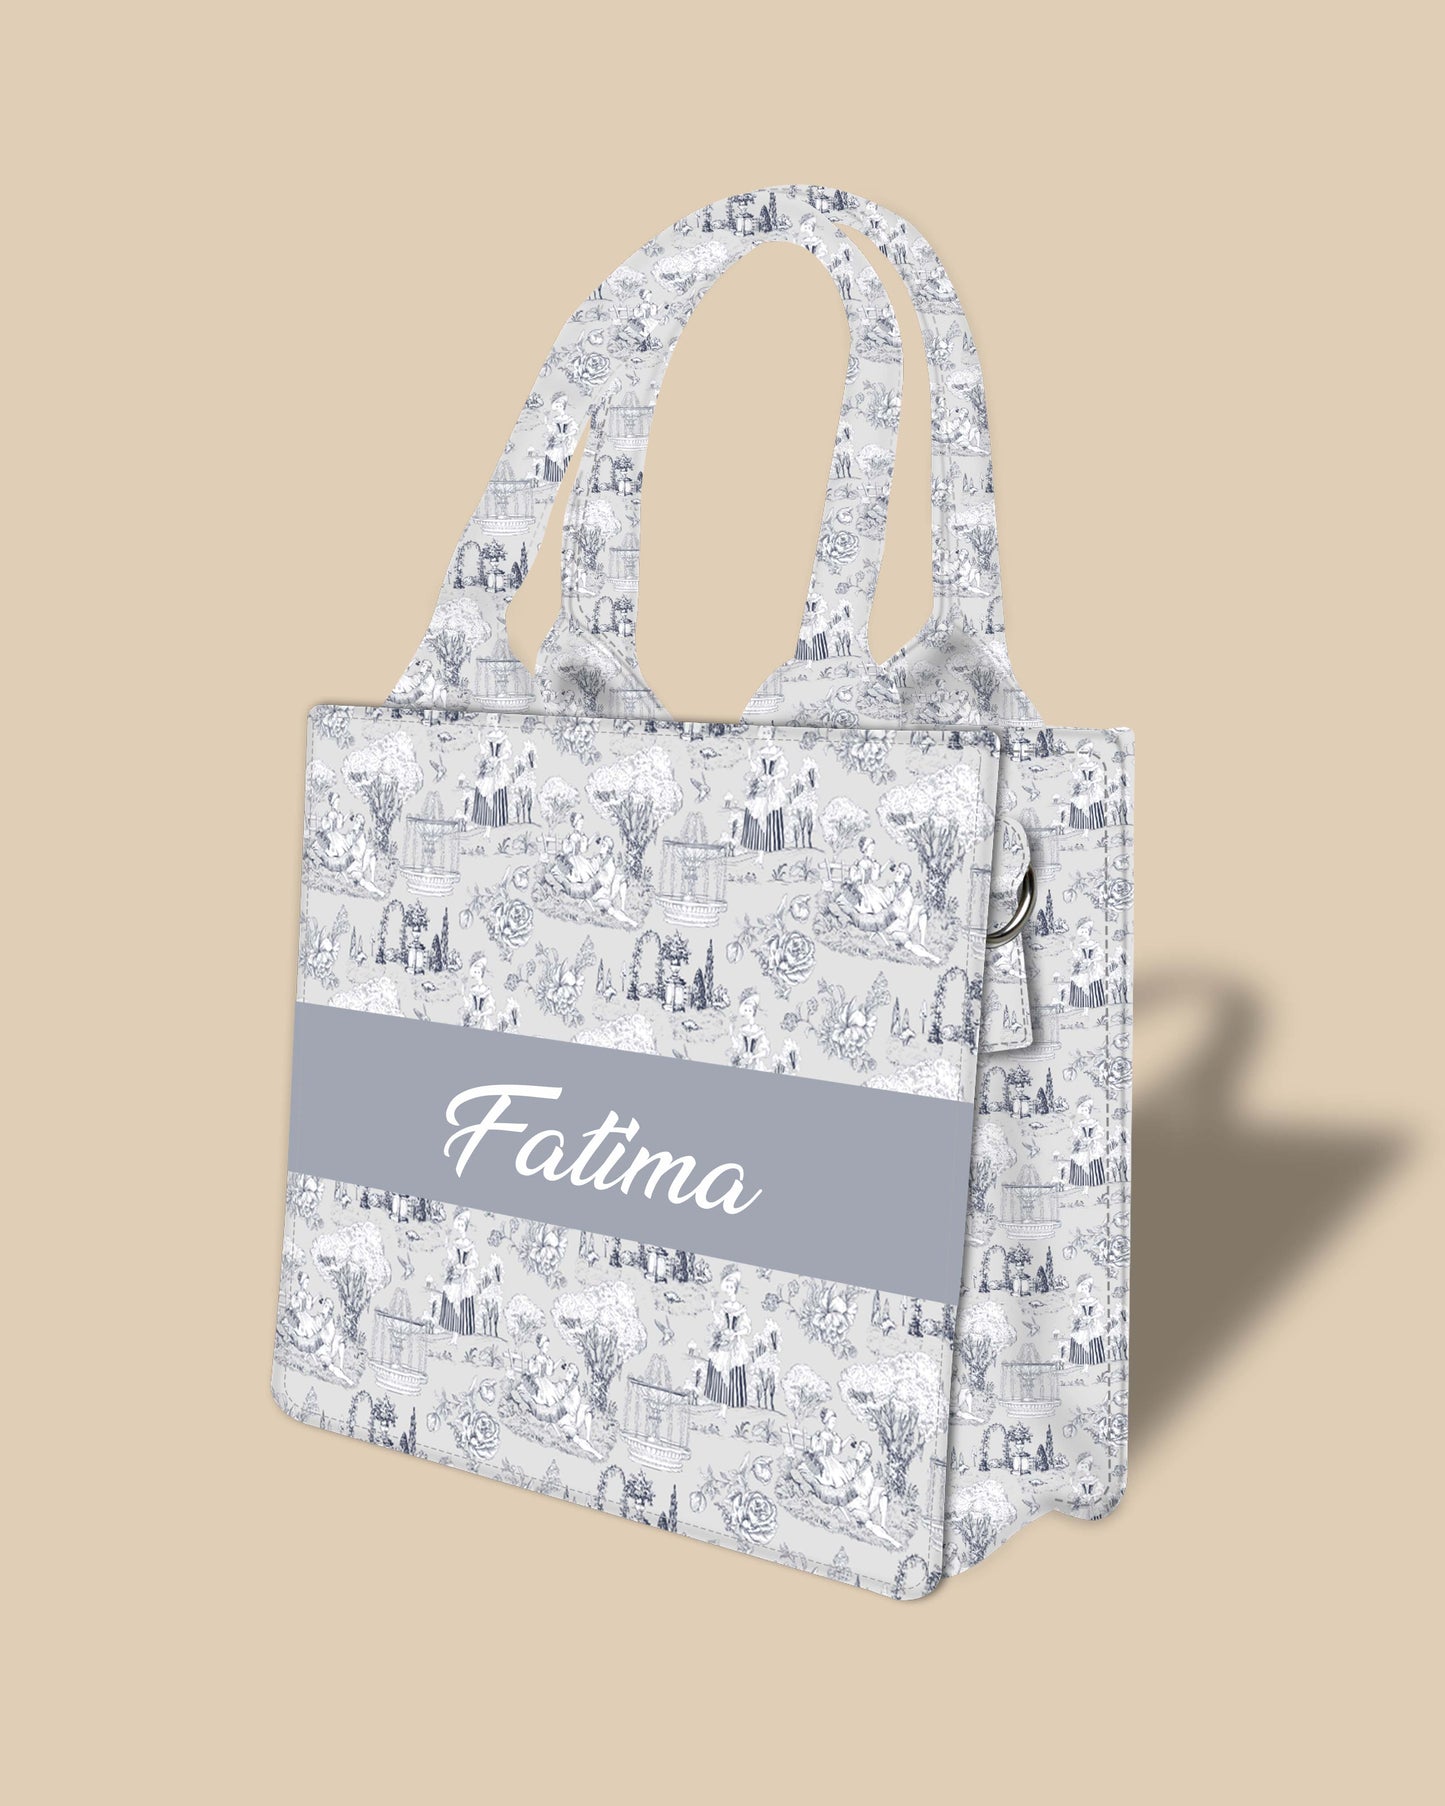 Customized Small Tote Bag Designed with Vintage French Lifestyle